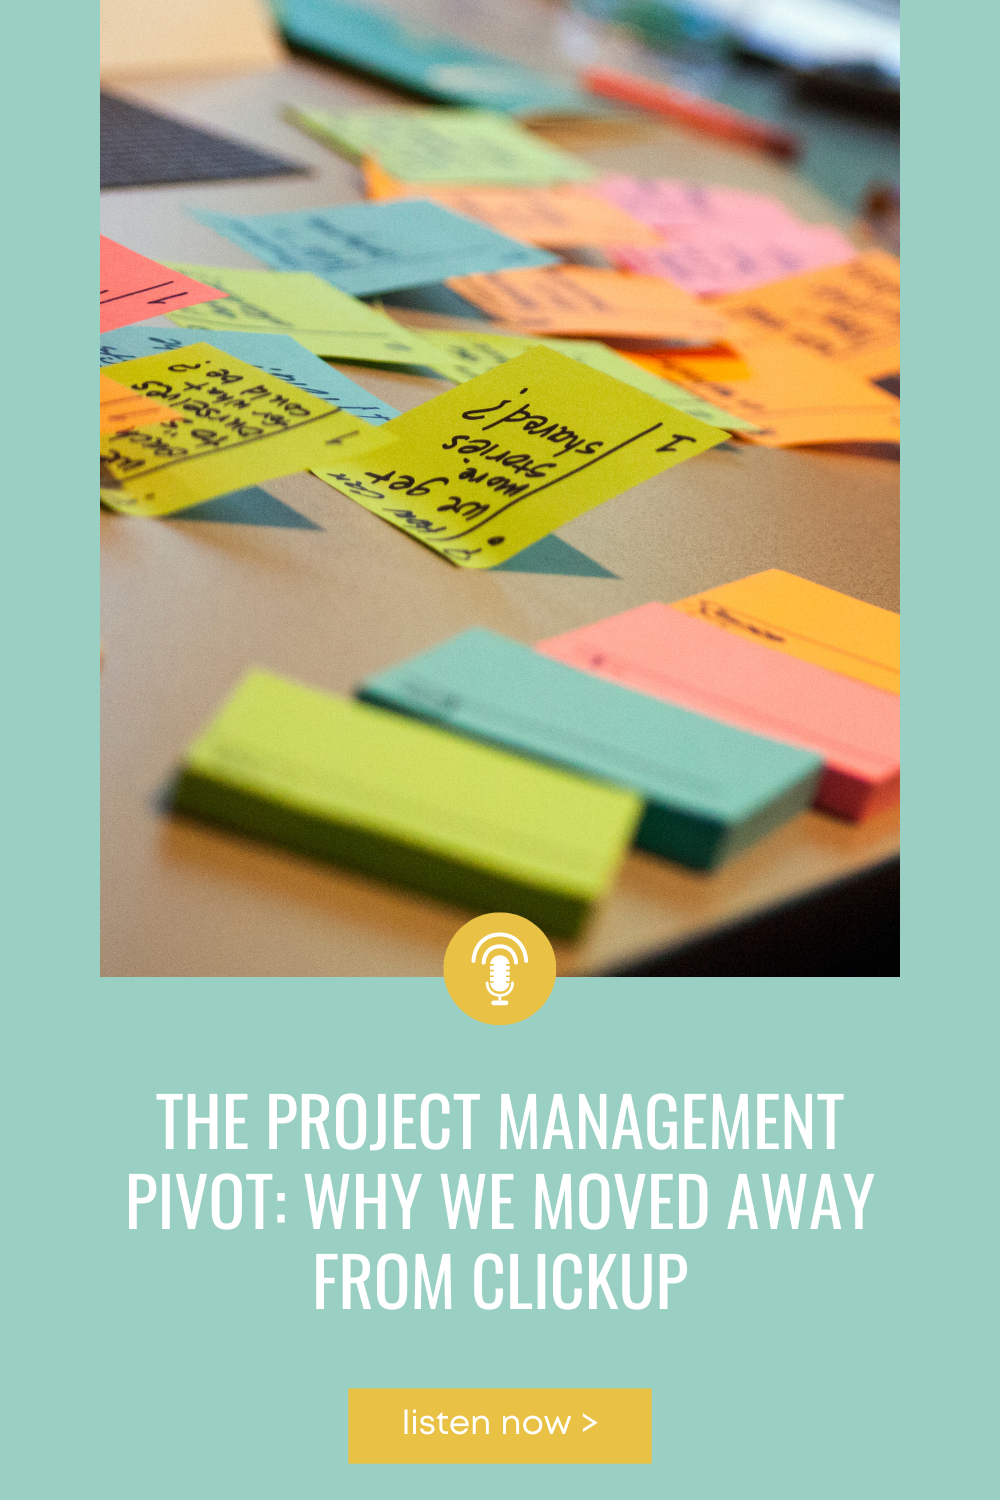 sticky notes on a desk with "The Project Management Pivot: Why We Moved Away From ClickUp" below